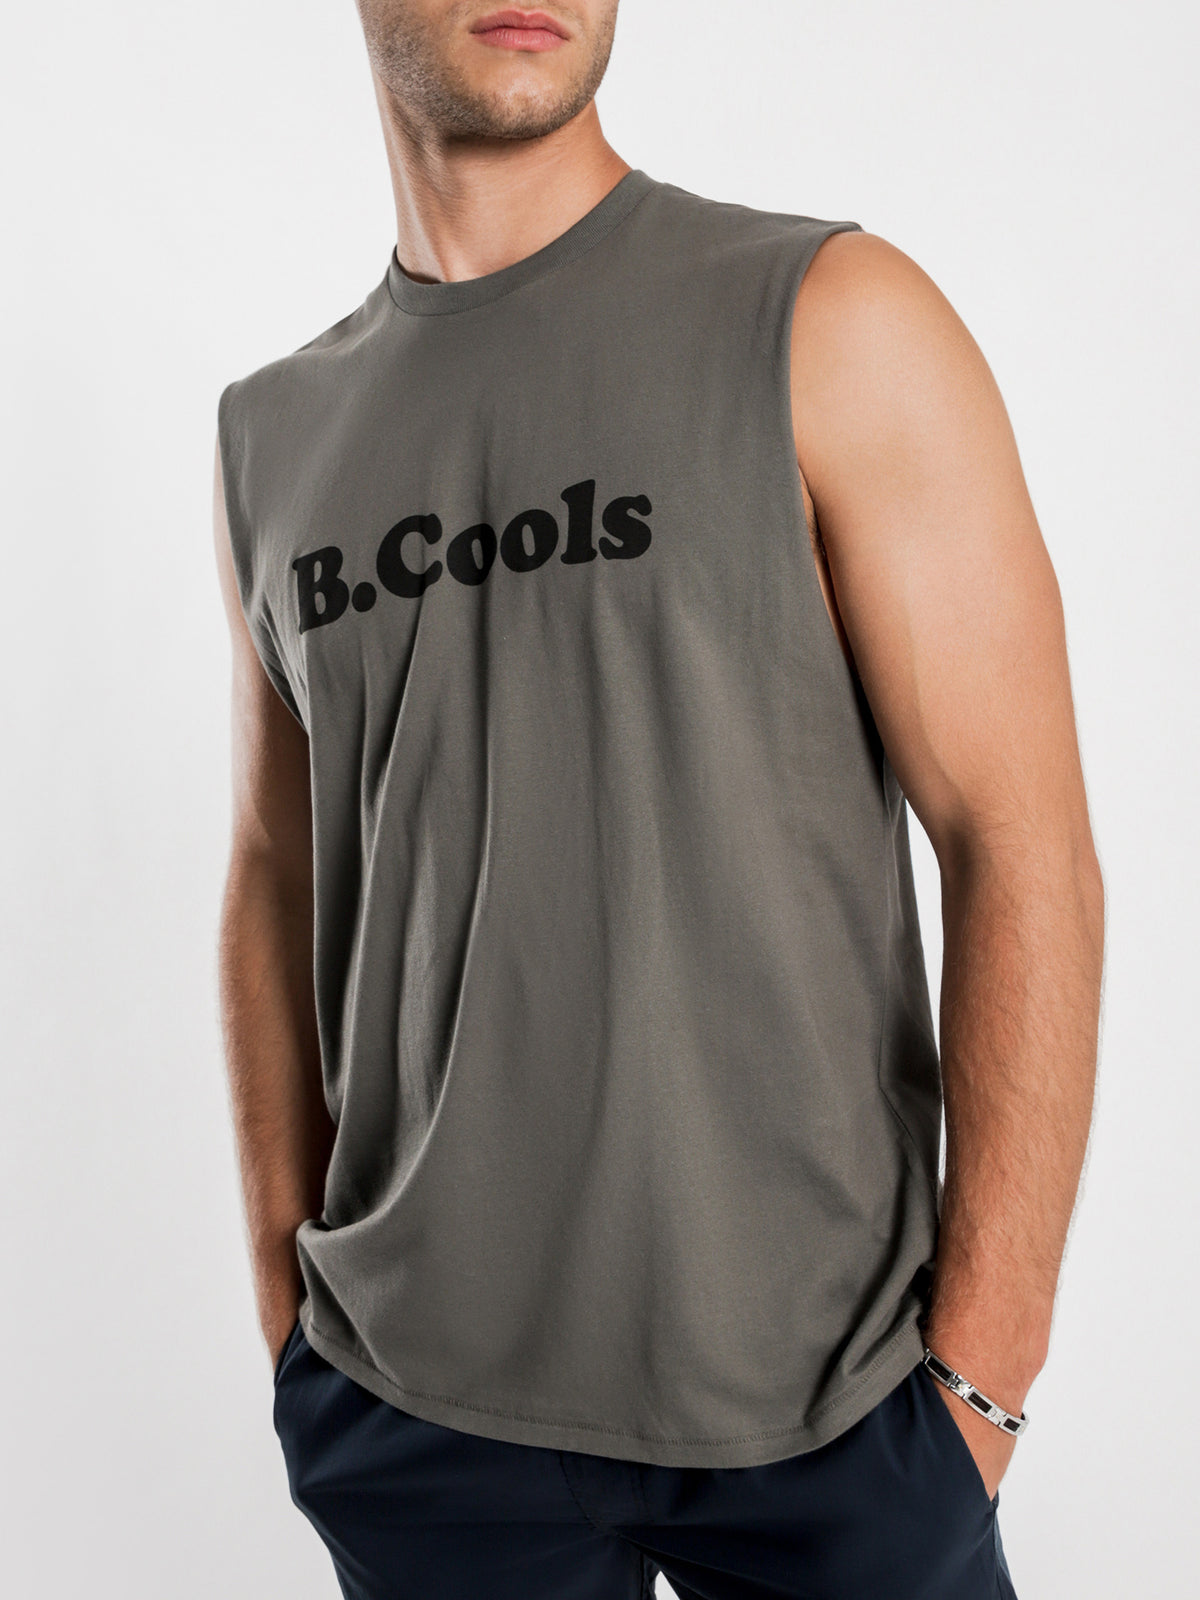 B.Cools Retro Muscle T-Shirt in Bottle Green